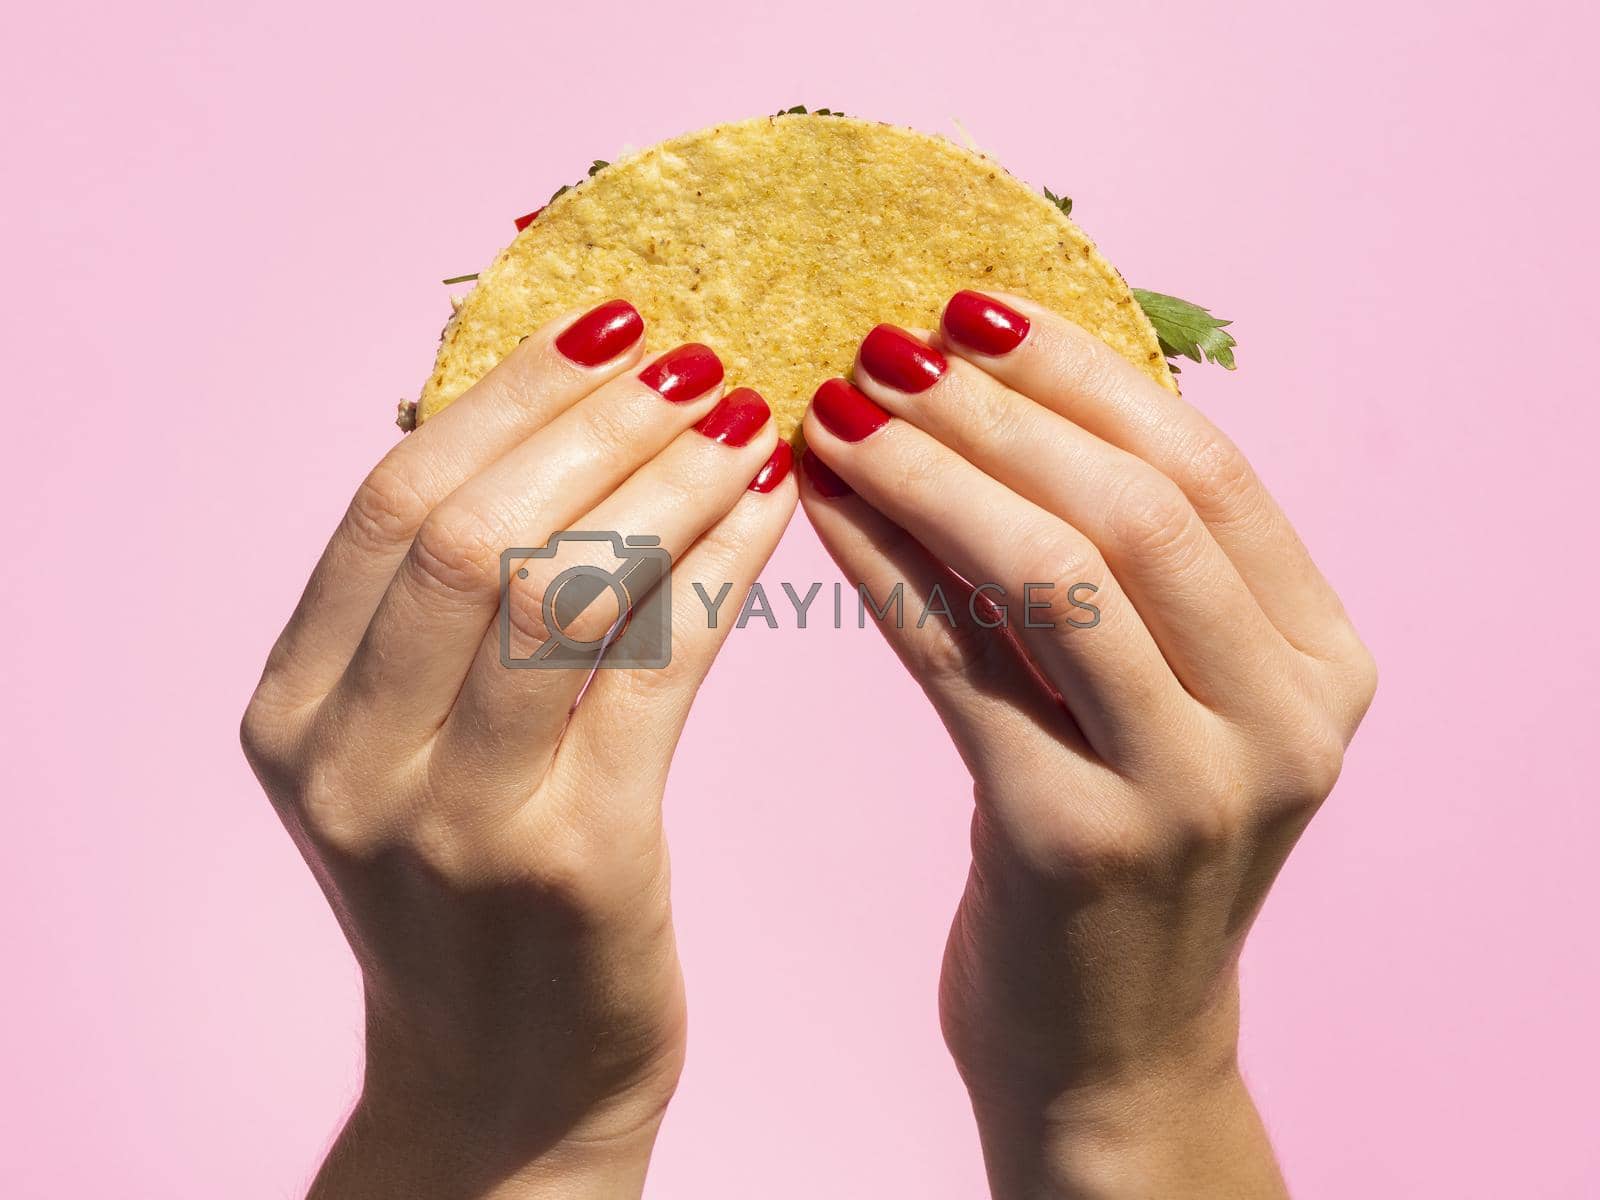 Royalty free image of close up hands holding taco with pink background by Zahard